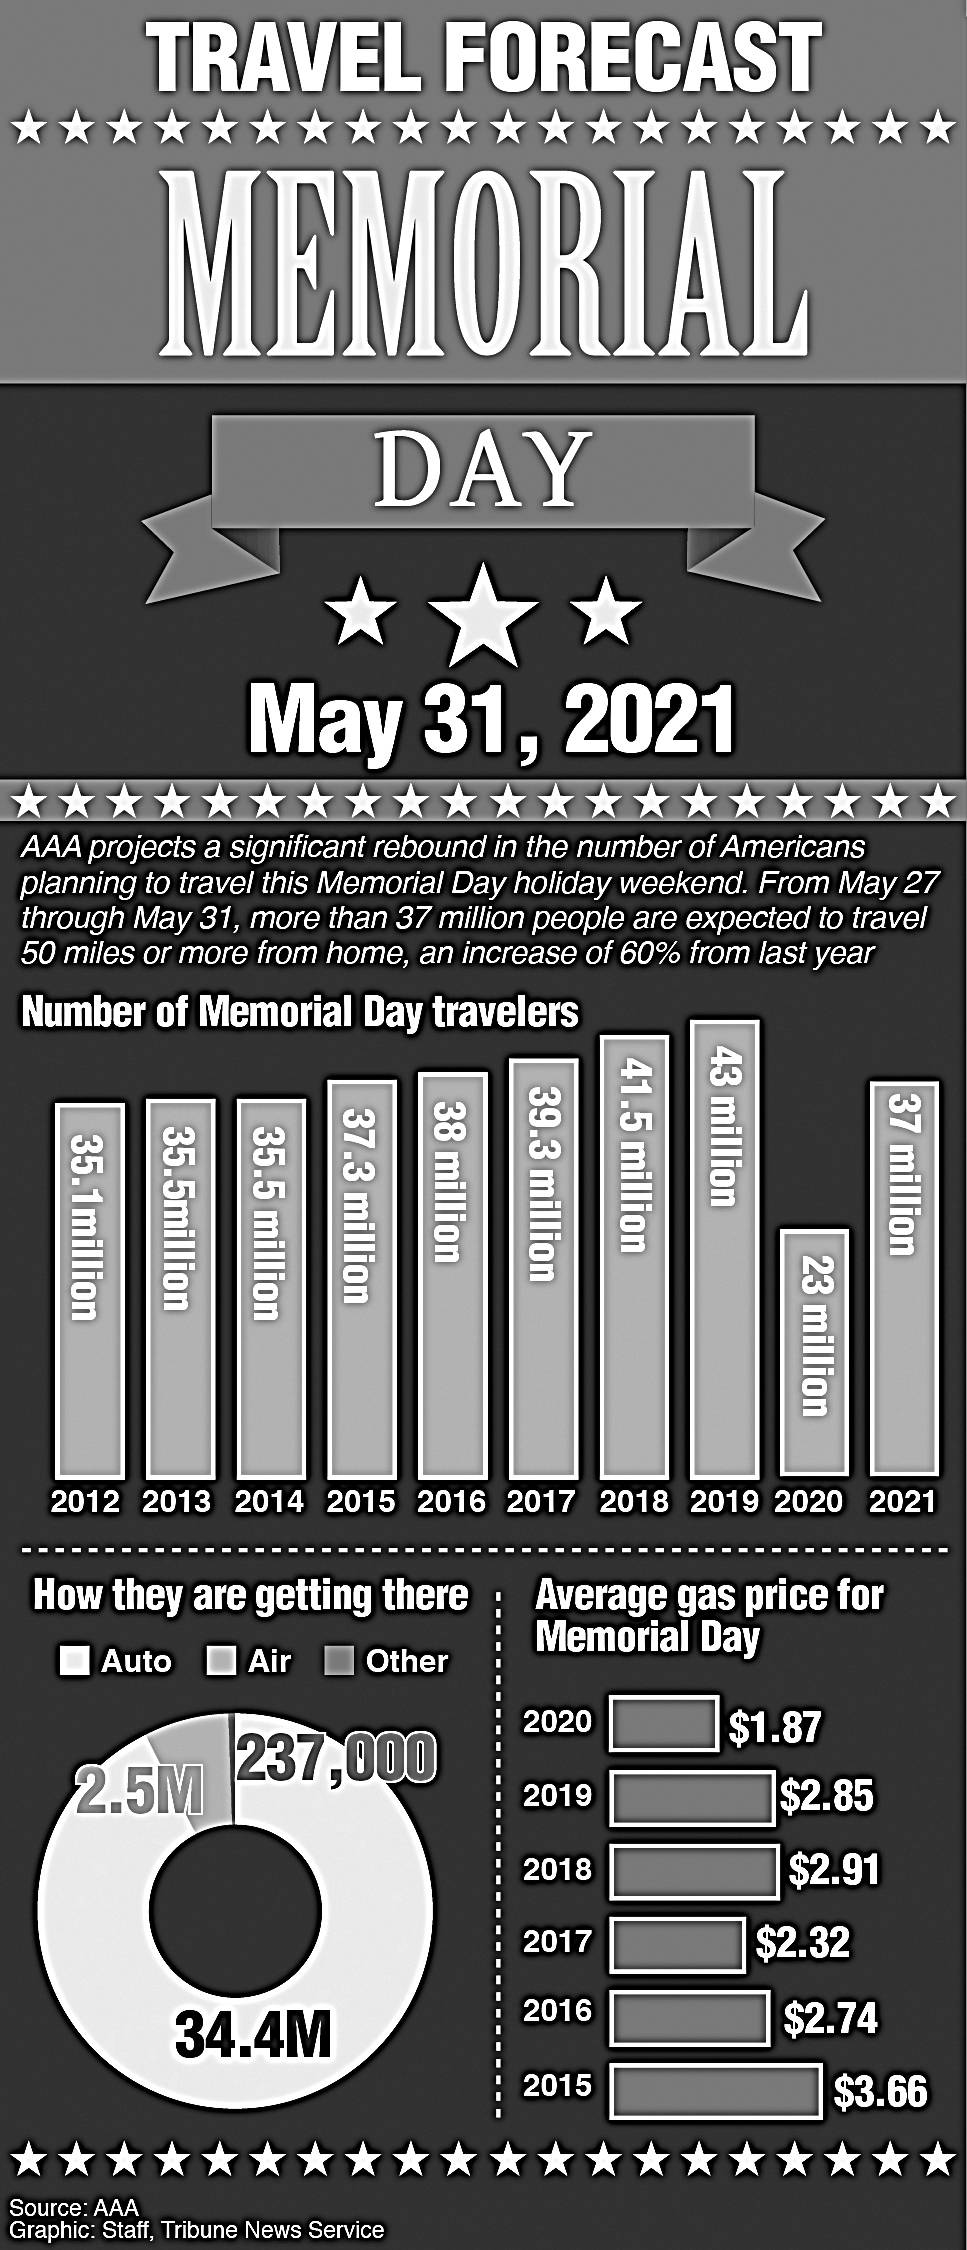 Graphic showing the travel forecast for Memorial Day.